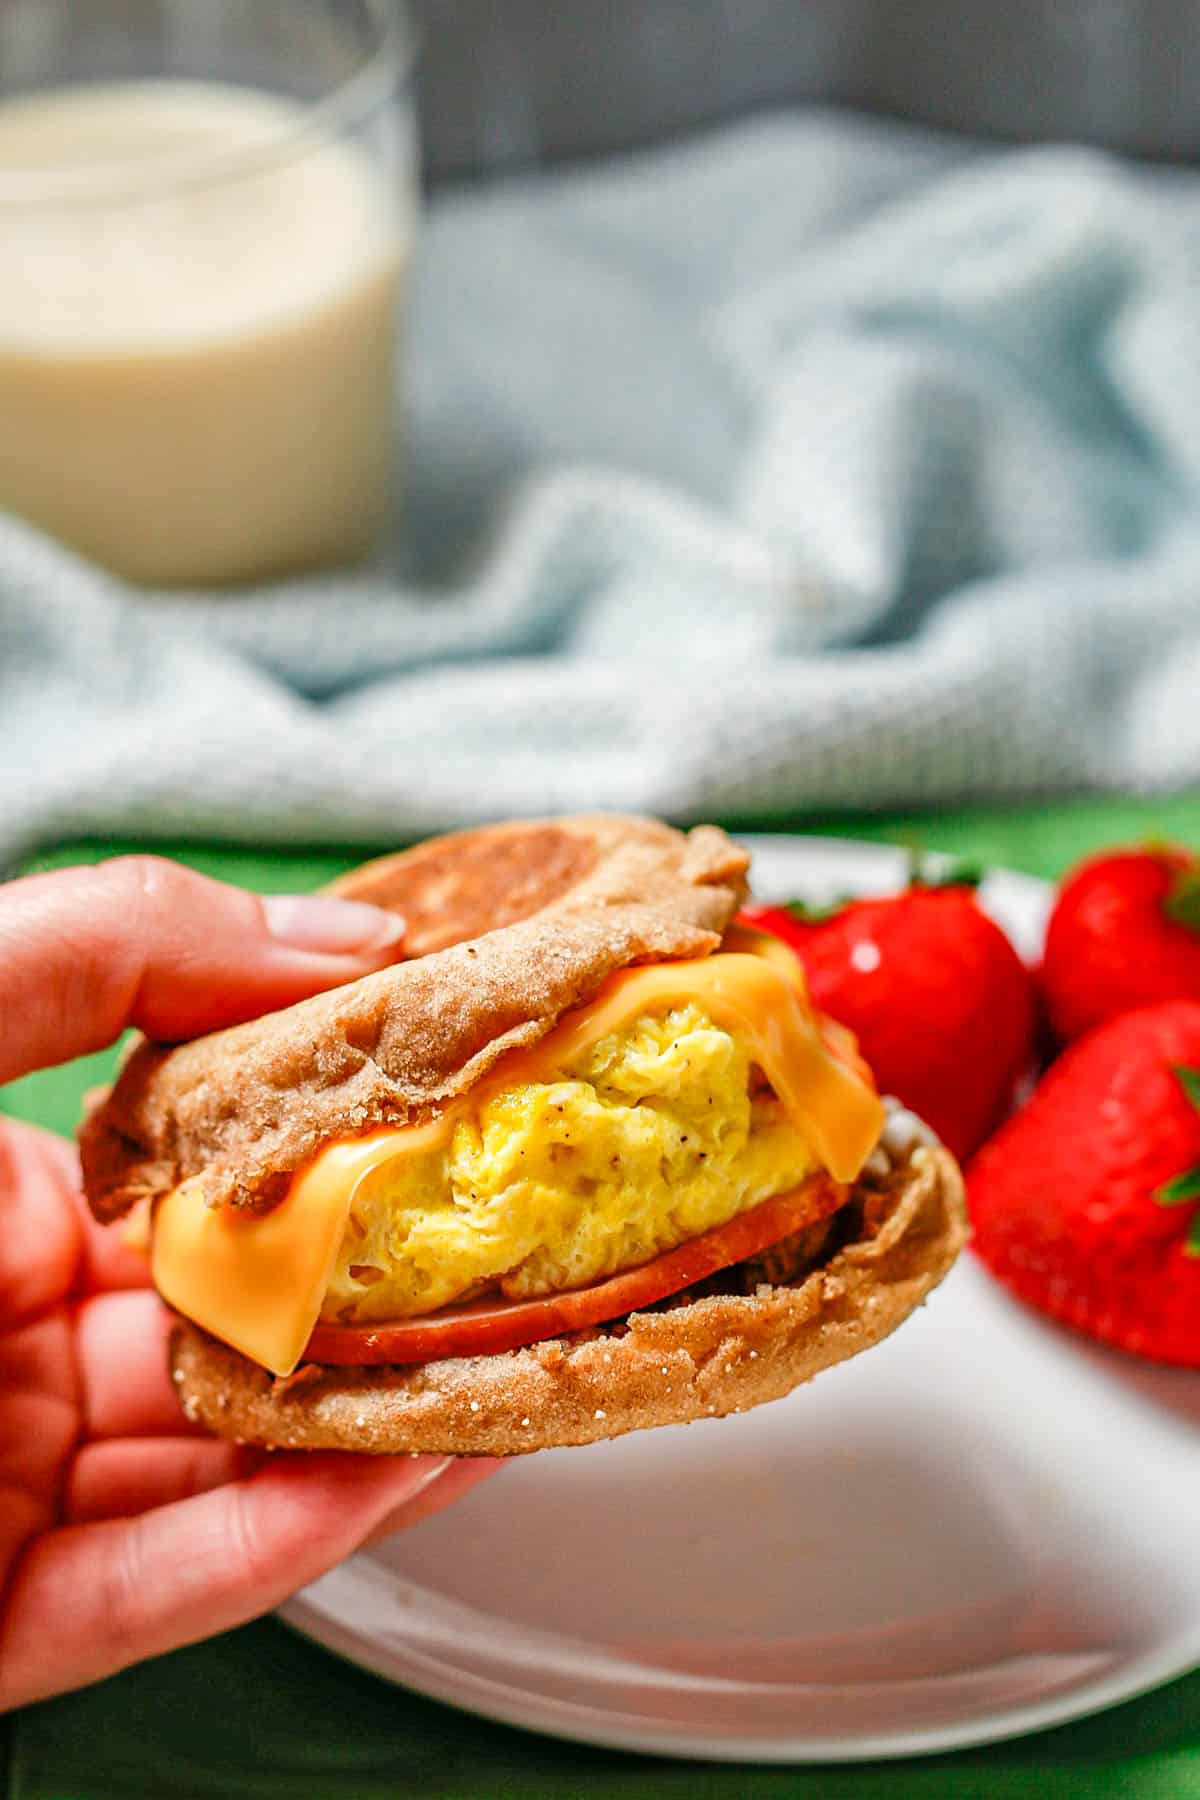 A hand holding up a homemade English muffin sandwich from a white plate with some fresh strawberries on it and a glass of milk in the background.